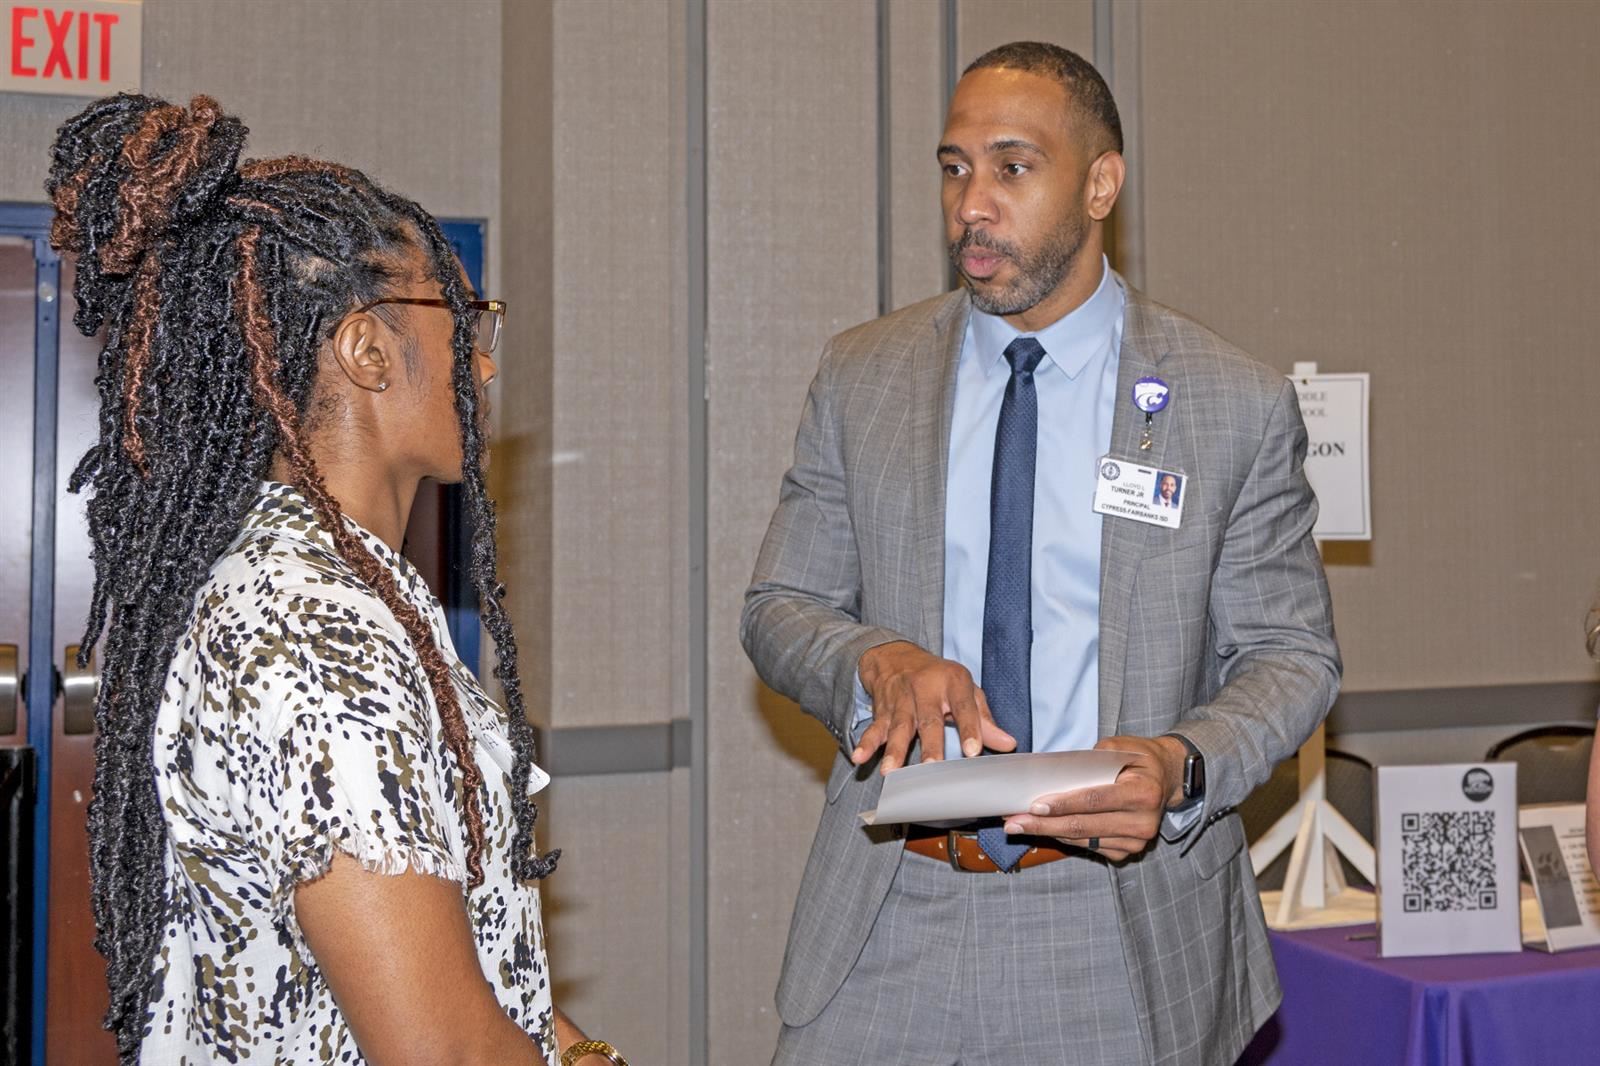 Lloyd Turner, the principal at Aragon Middle School, speaks with a guest at the CFISD Career Fair in April 2022.